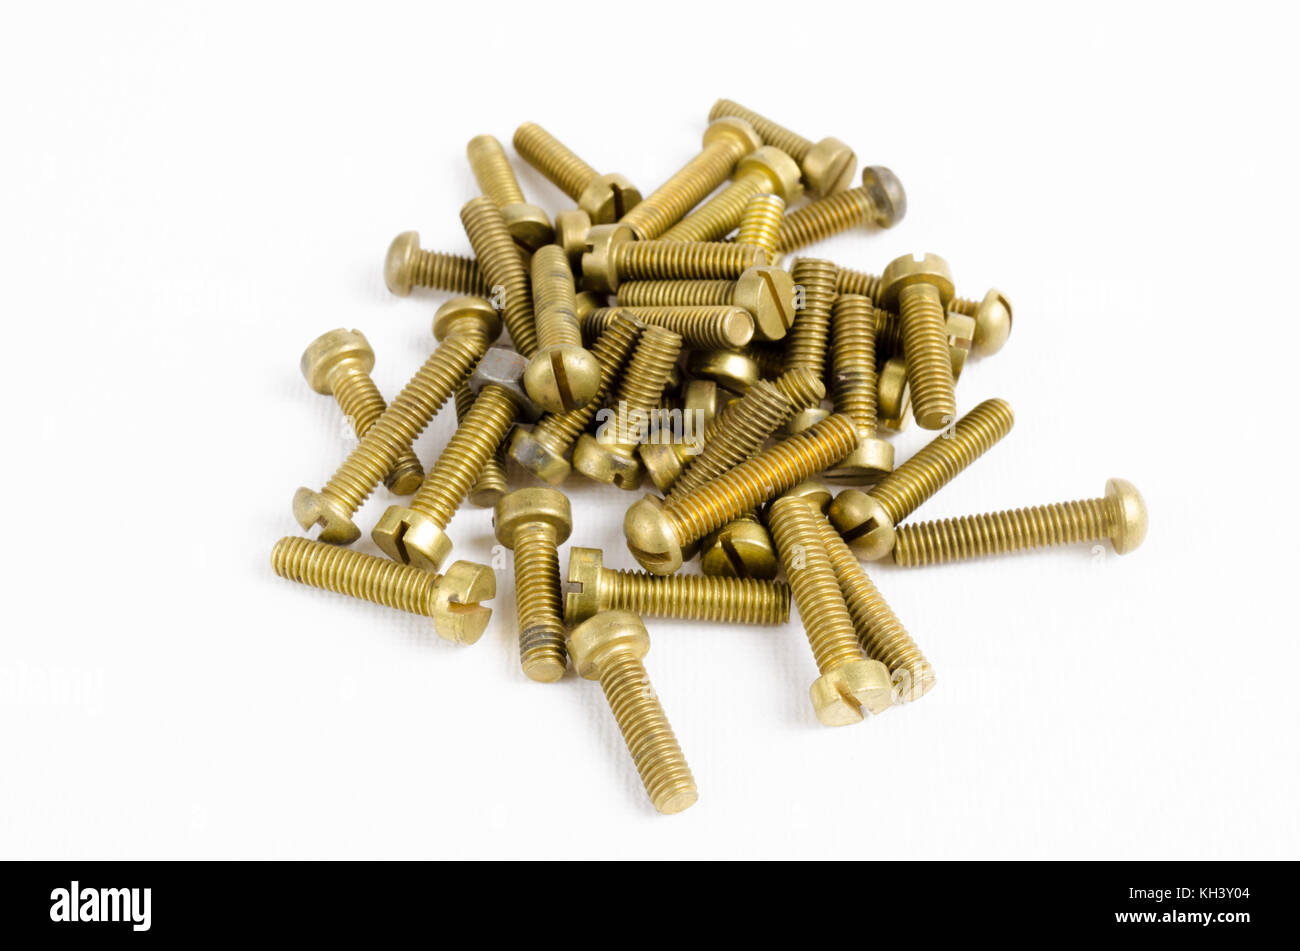 A Studio Photograph of a Collection of Brass Bolts Stock Photo